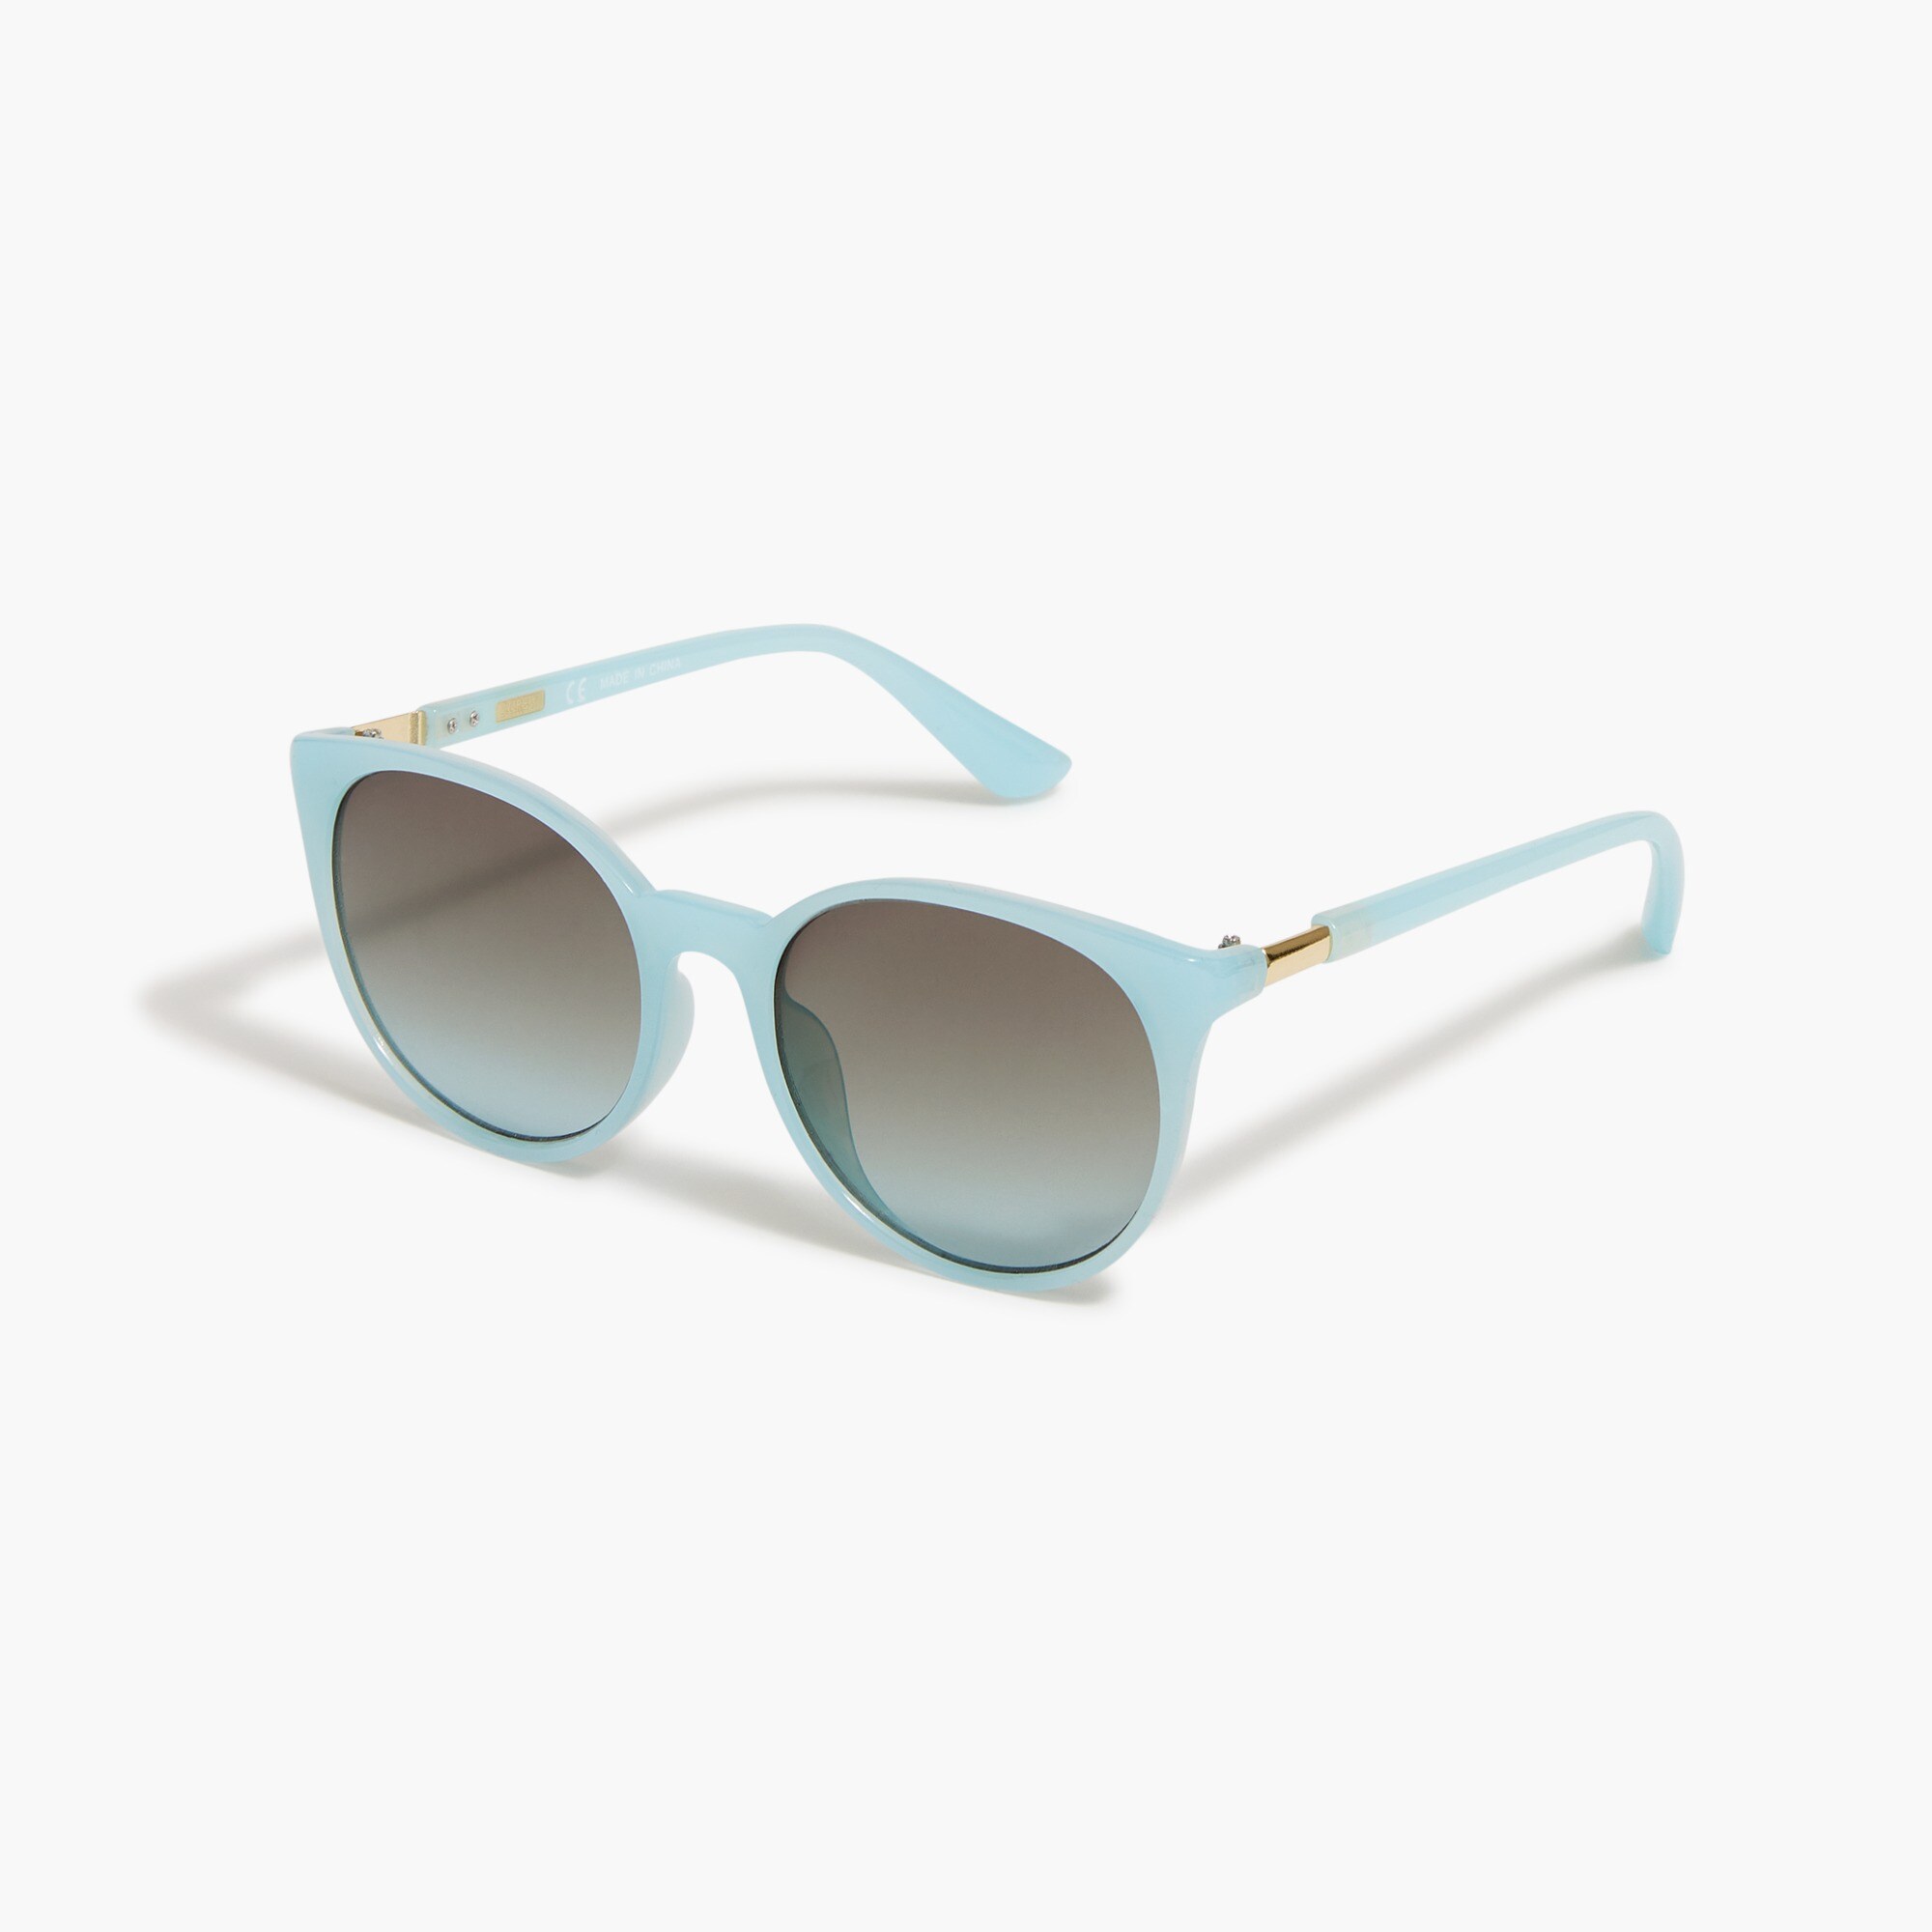 womens Rounded-frame sunglasses